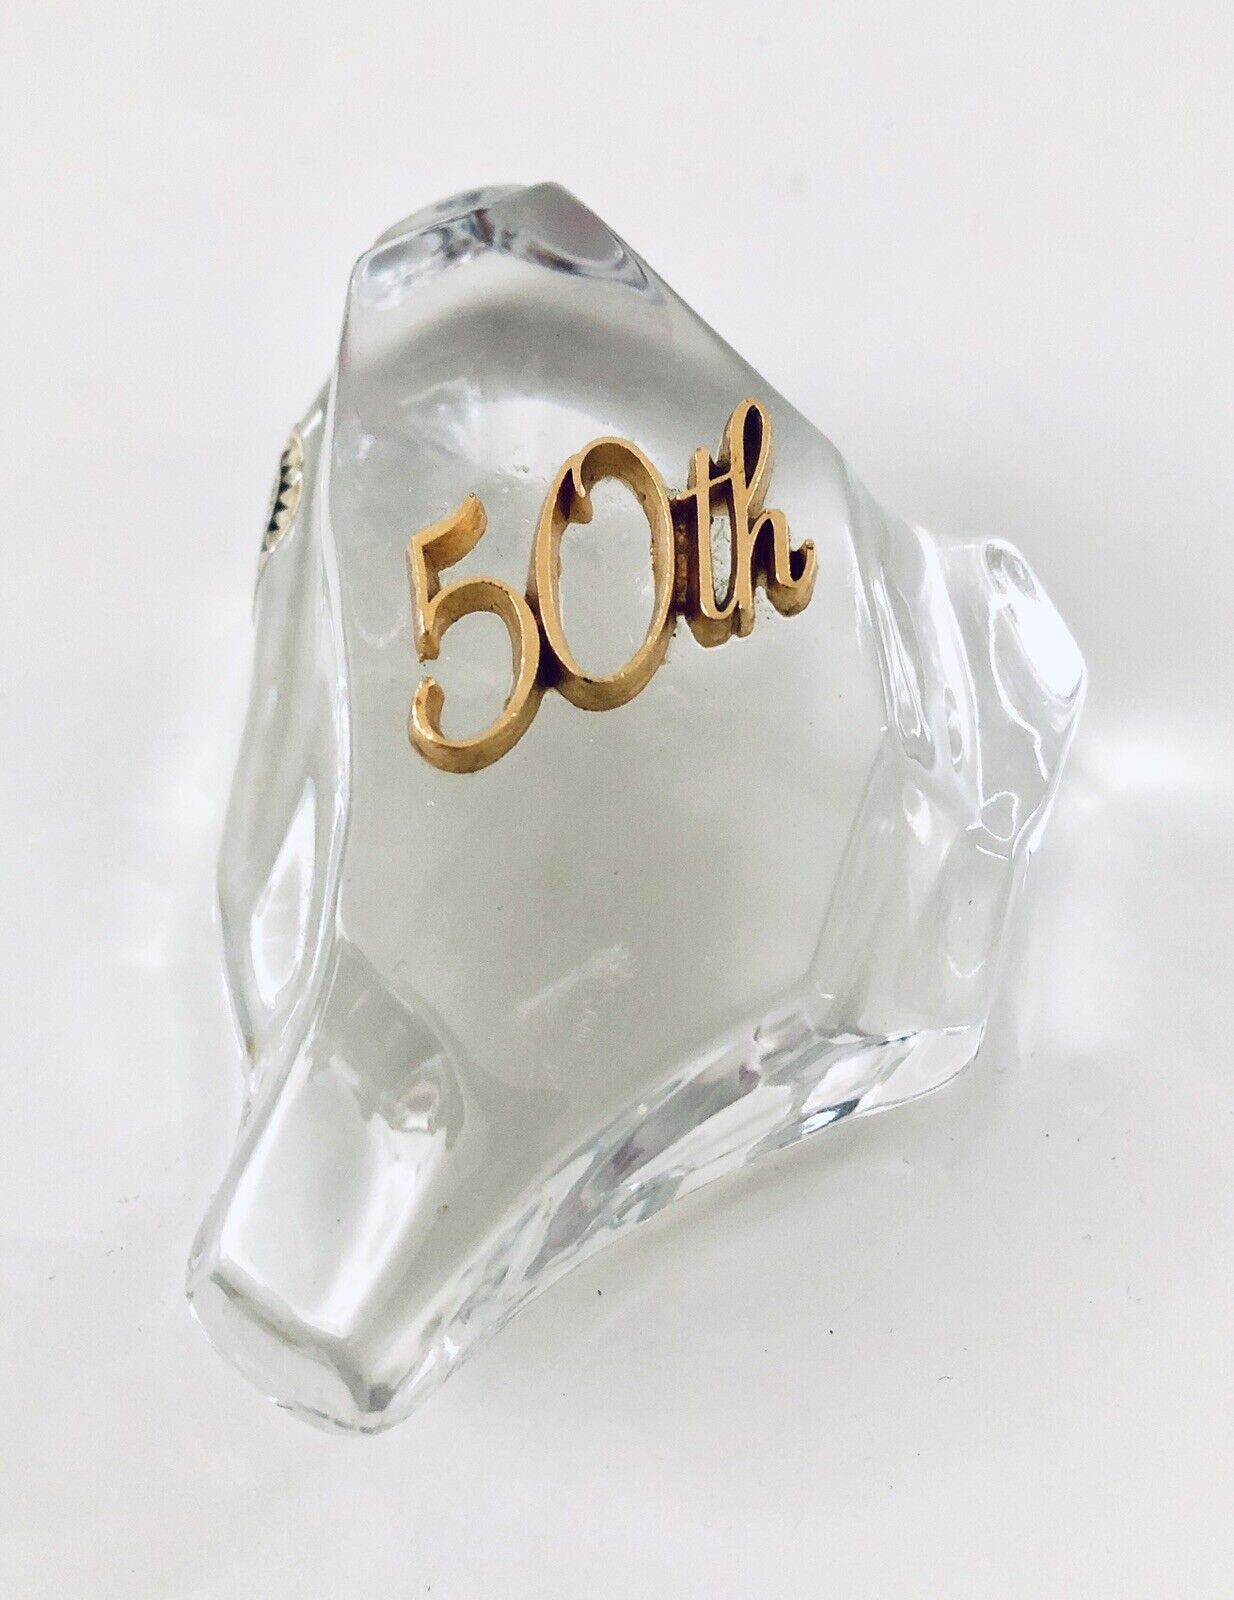 50 50th Fiftieth Birthday Anniversary Gerity Products 24 Carat Gold Electroplate